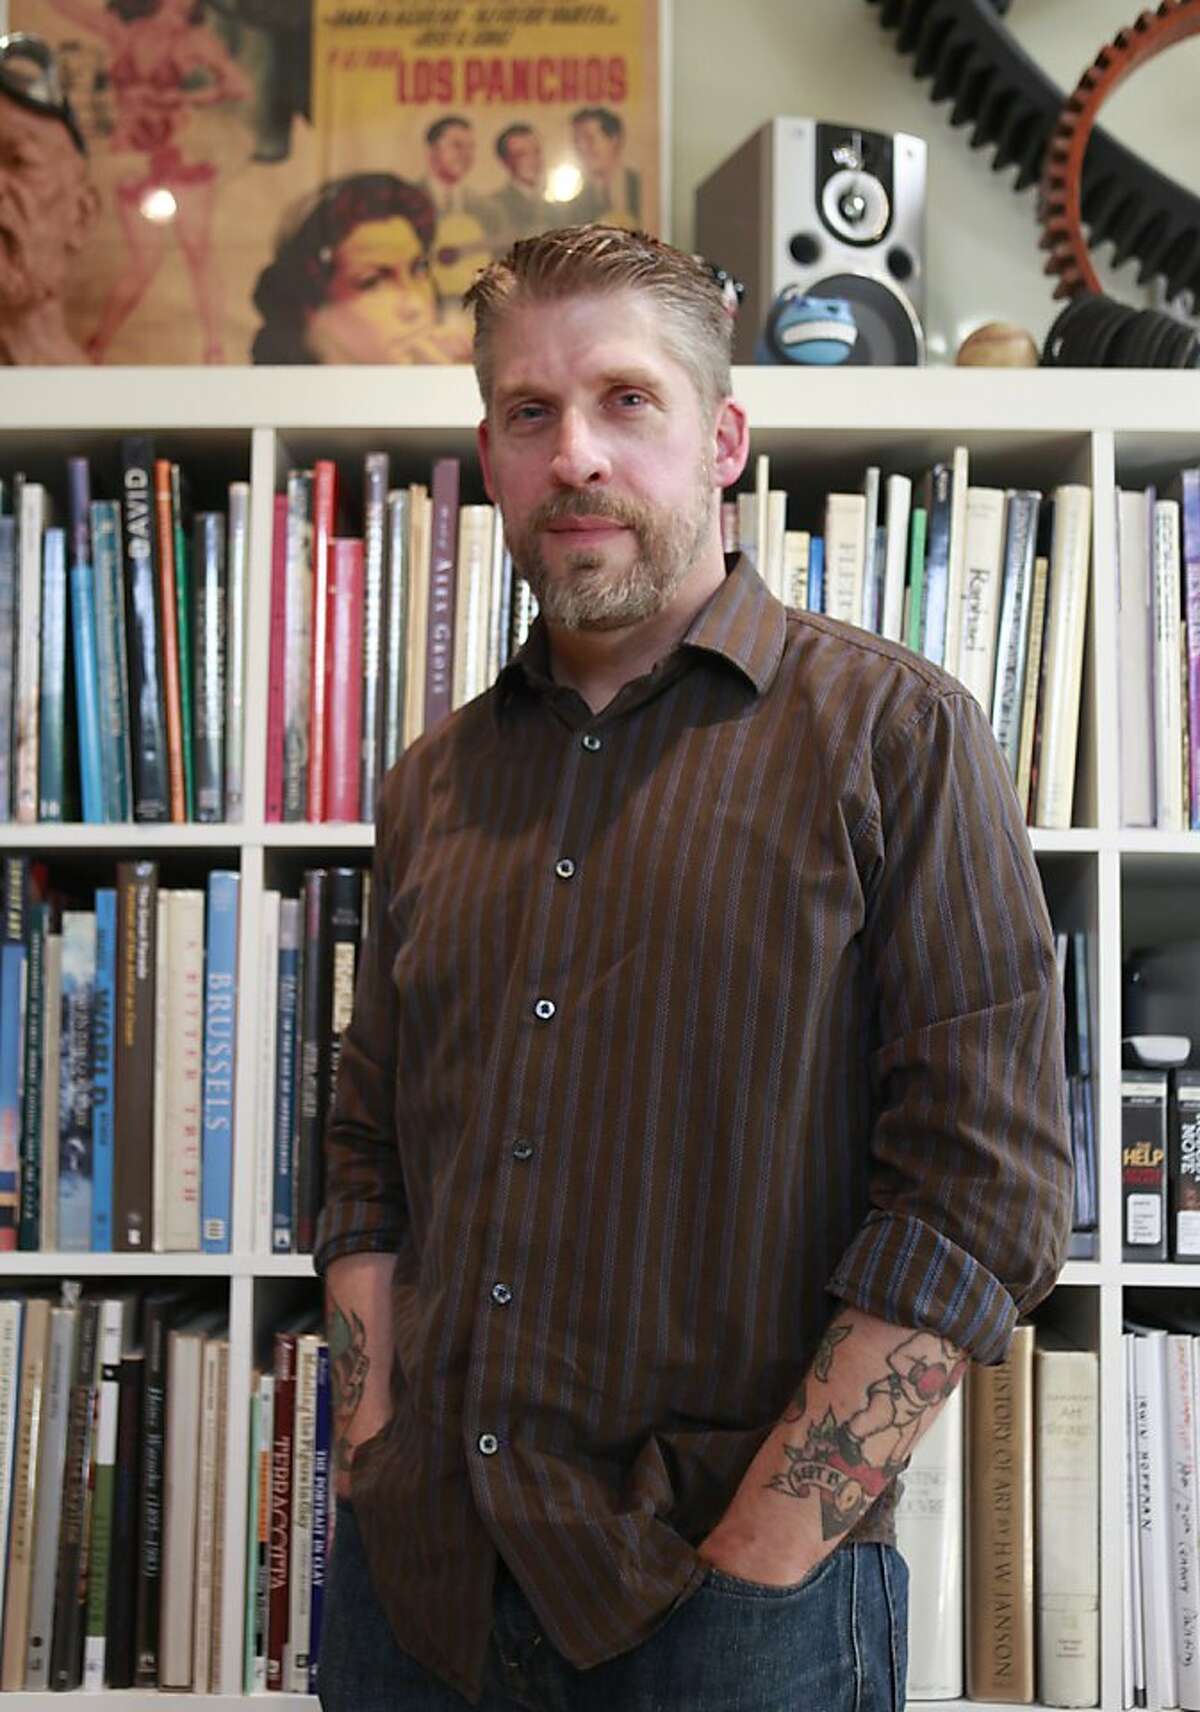 Owen Smith, BART poster artist, in his studio on Thursday, May 24th, 2012 in Alameda, Calif.